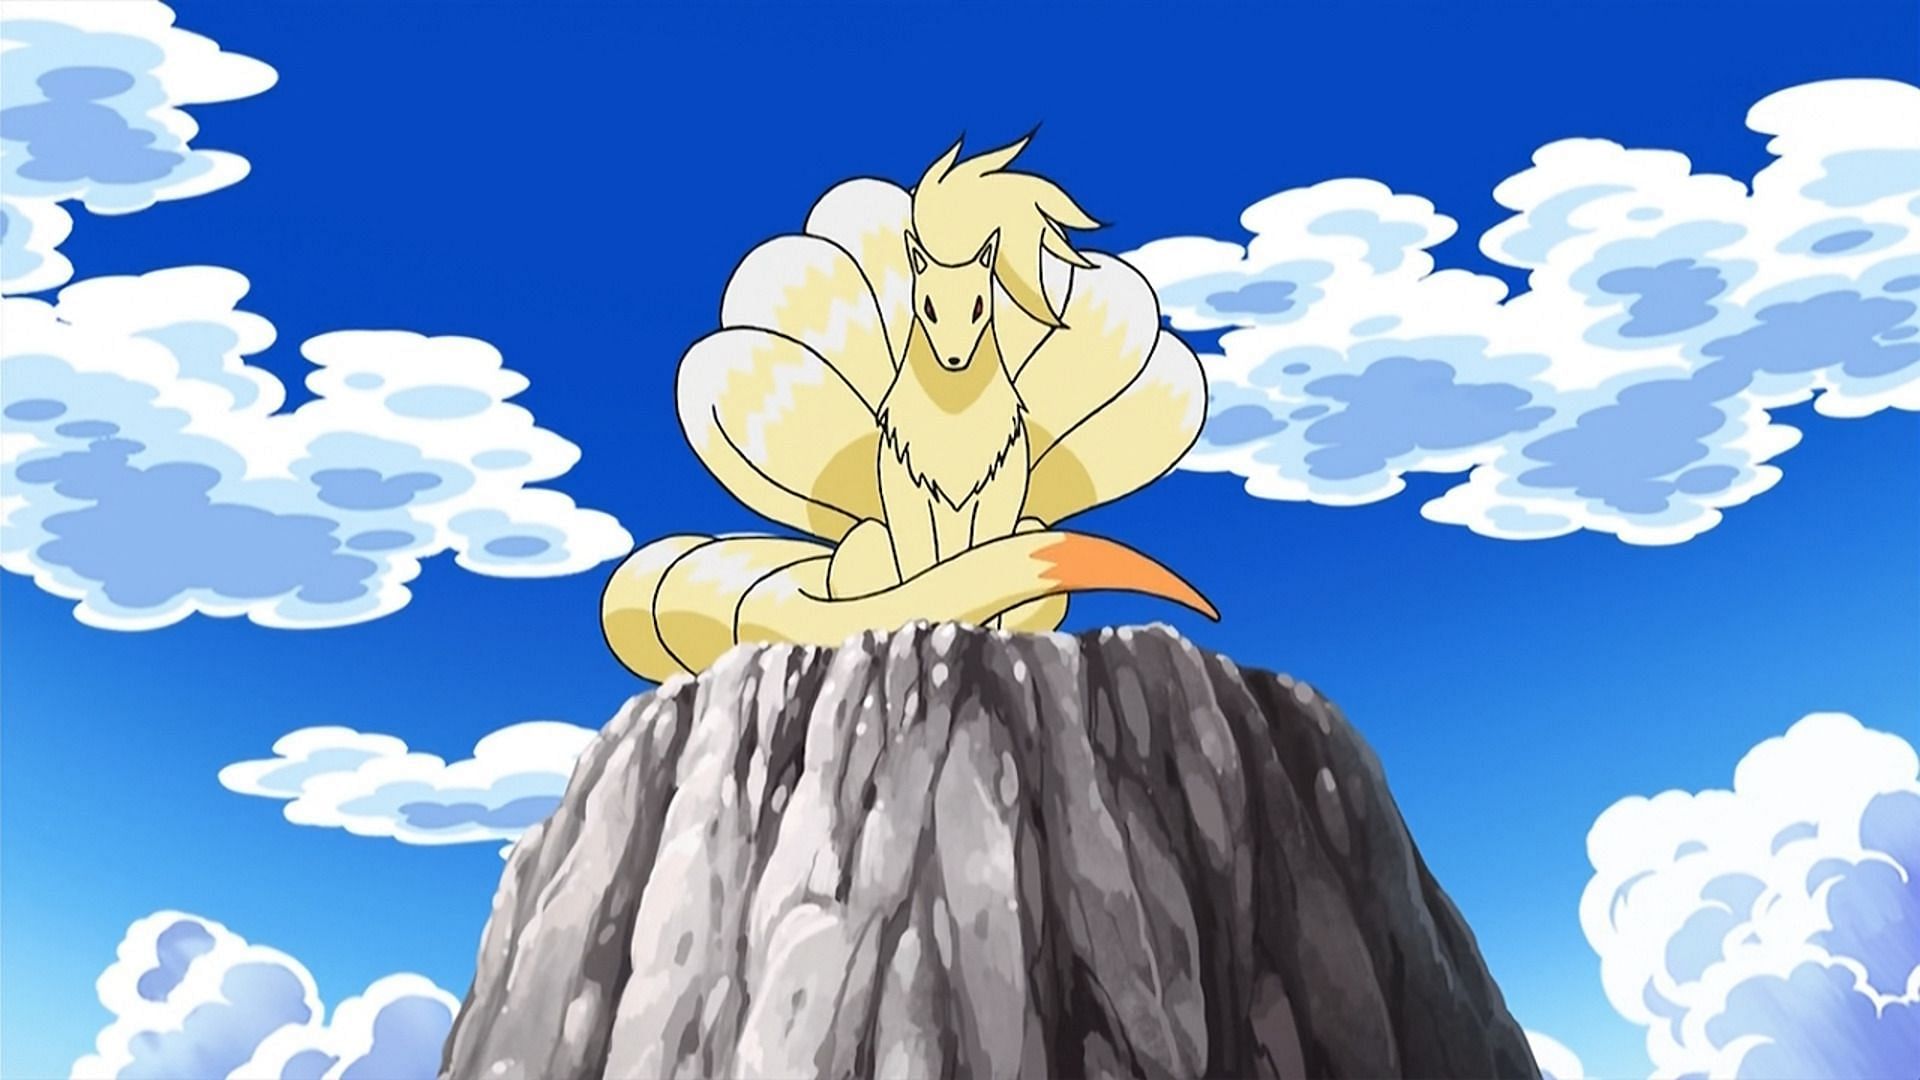 Ninetales as it appears in the anime (Image via The Pokemon Company)